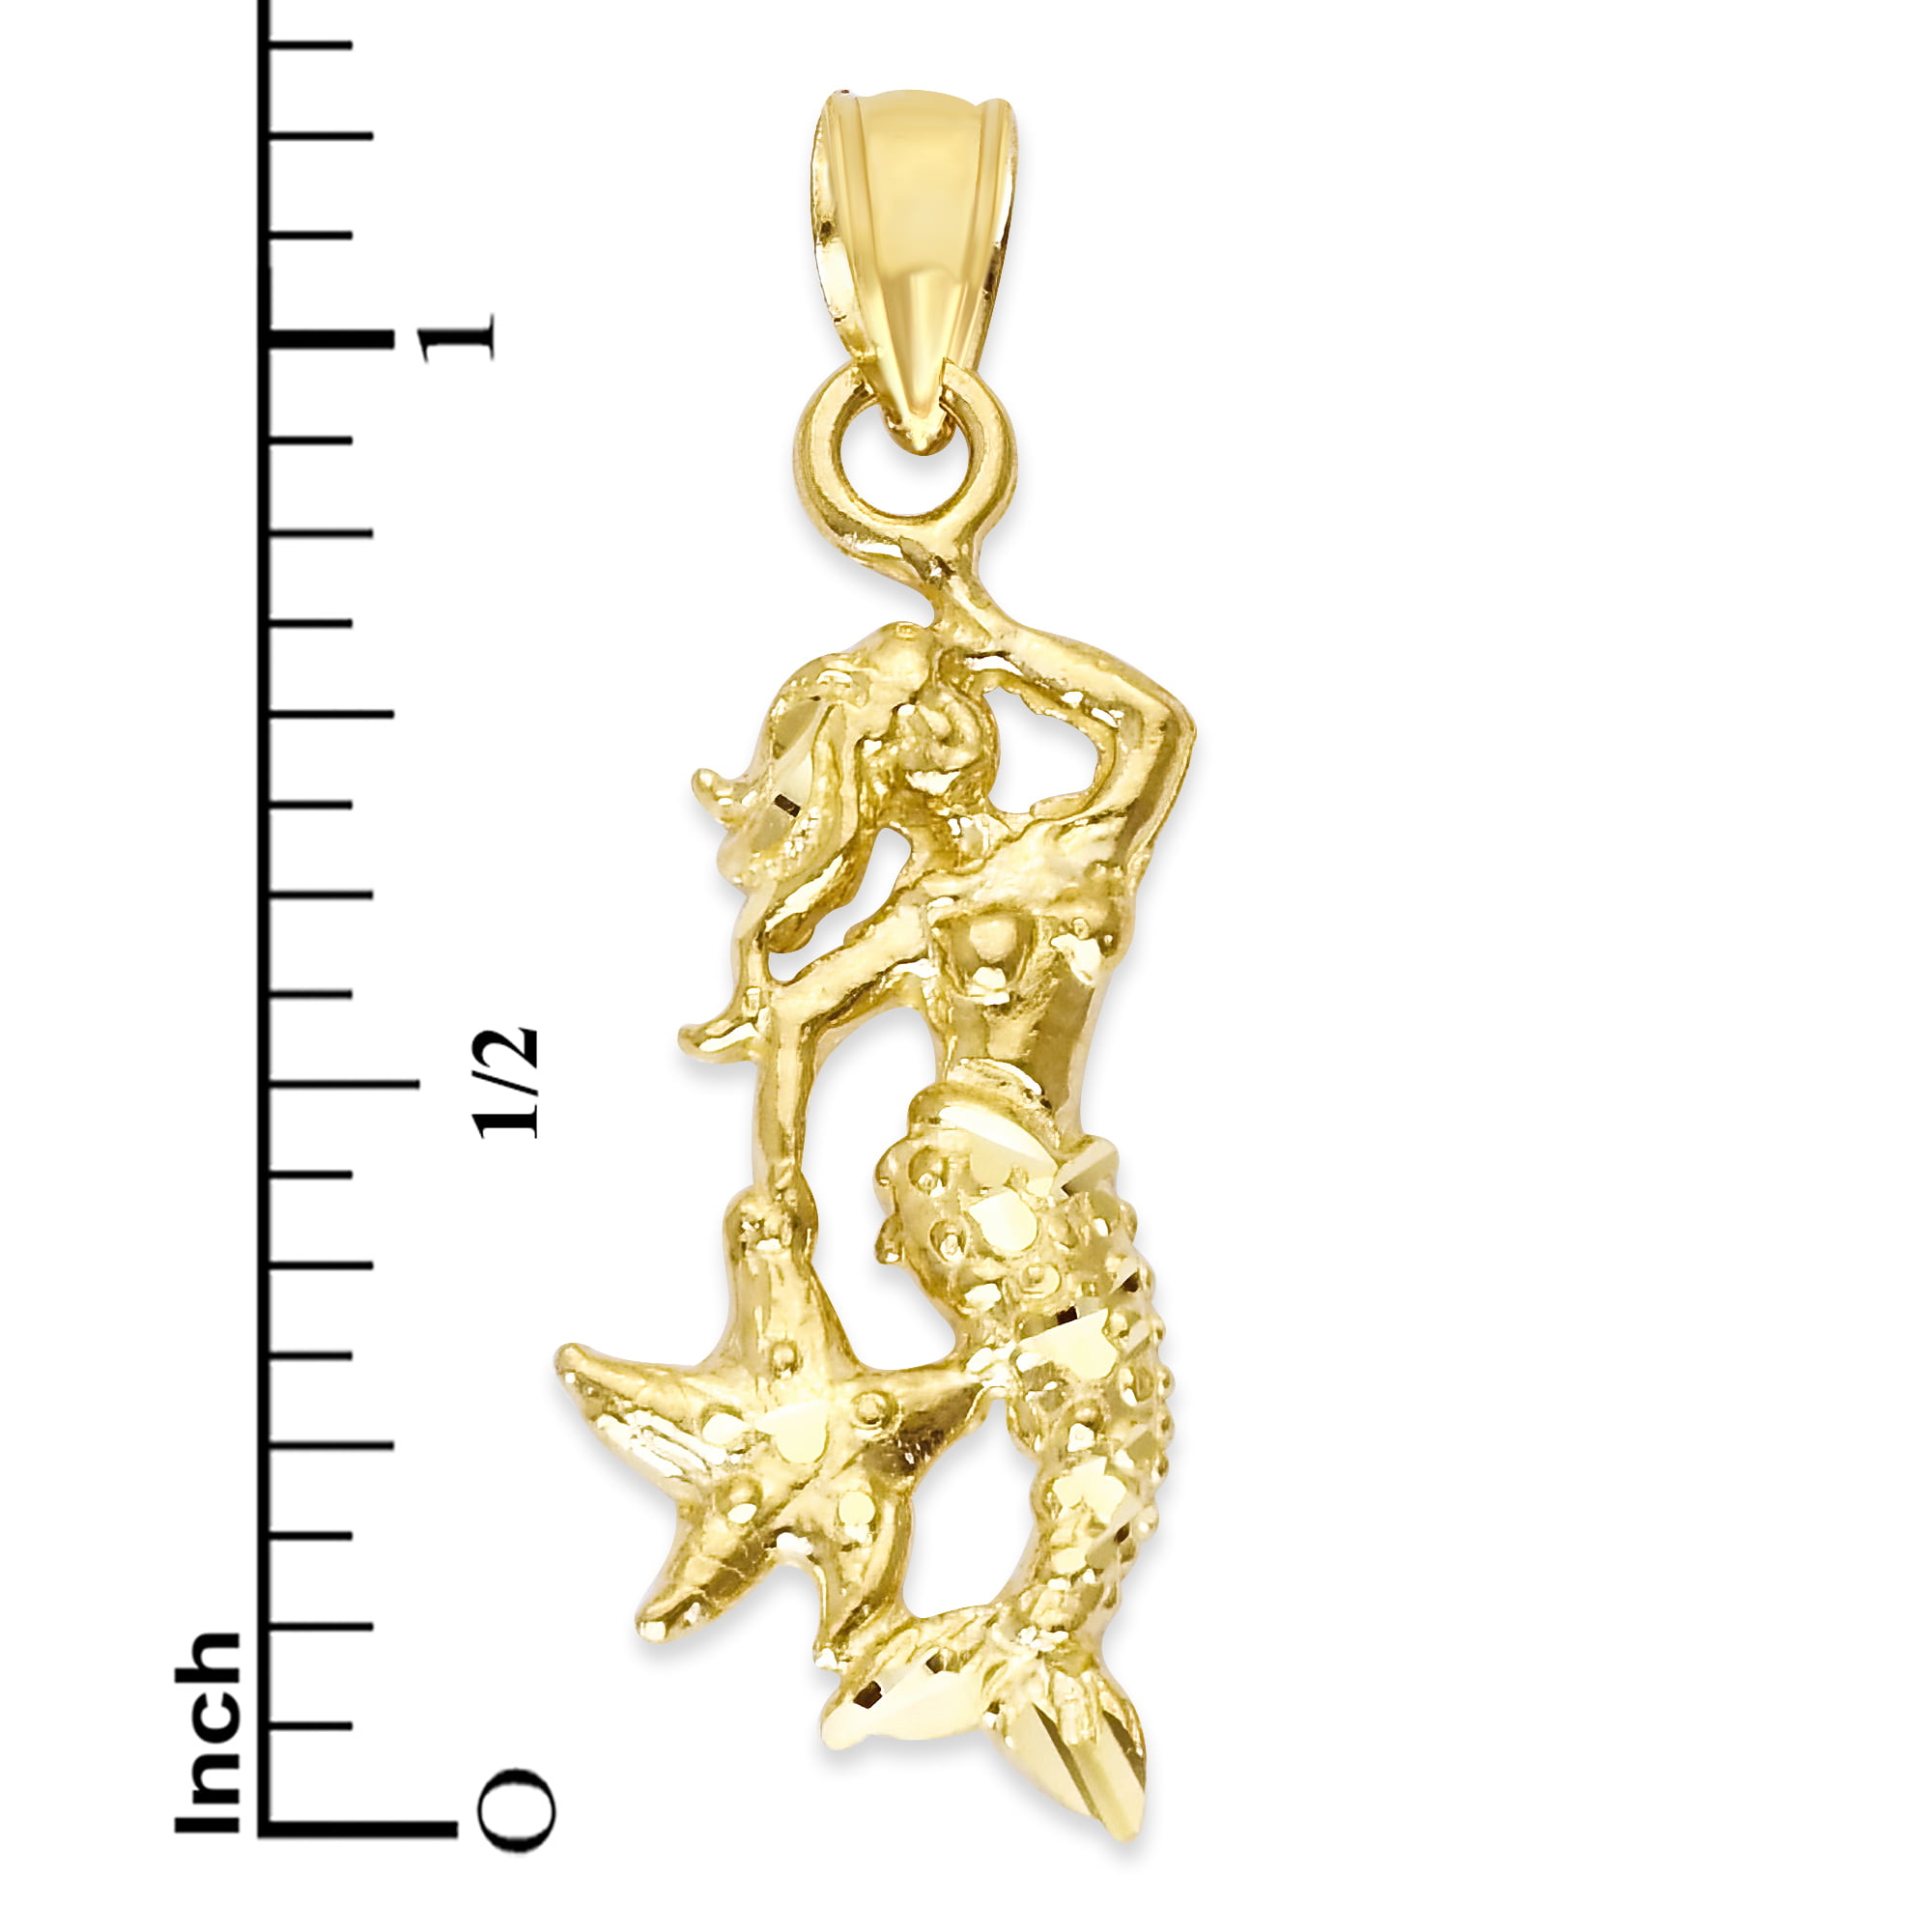 14K Yellow Gold Mermaid Charm Pendant with 1.2mm Box Chain Necklace